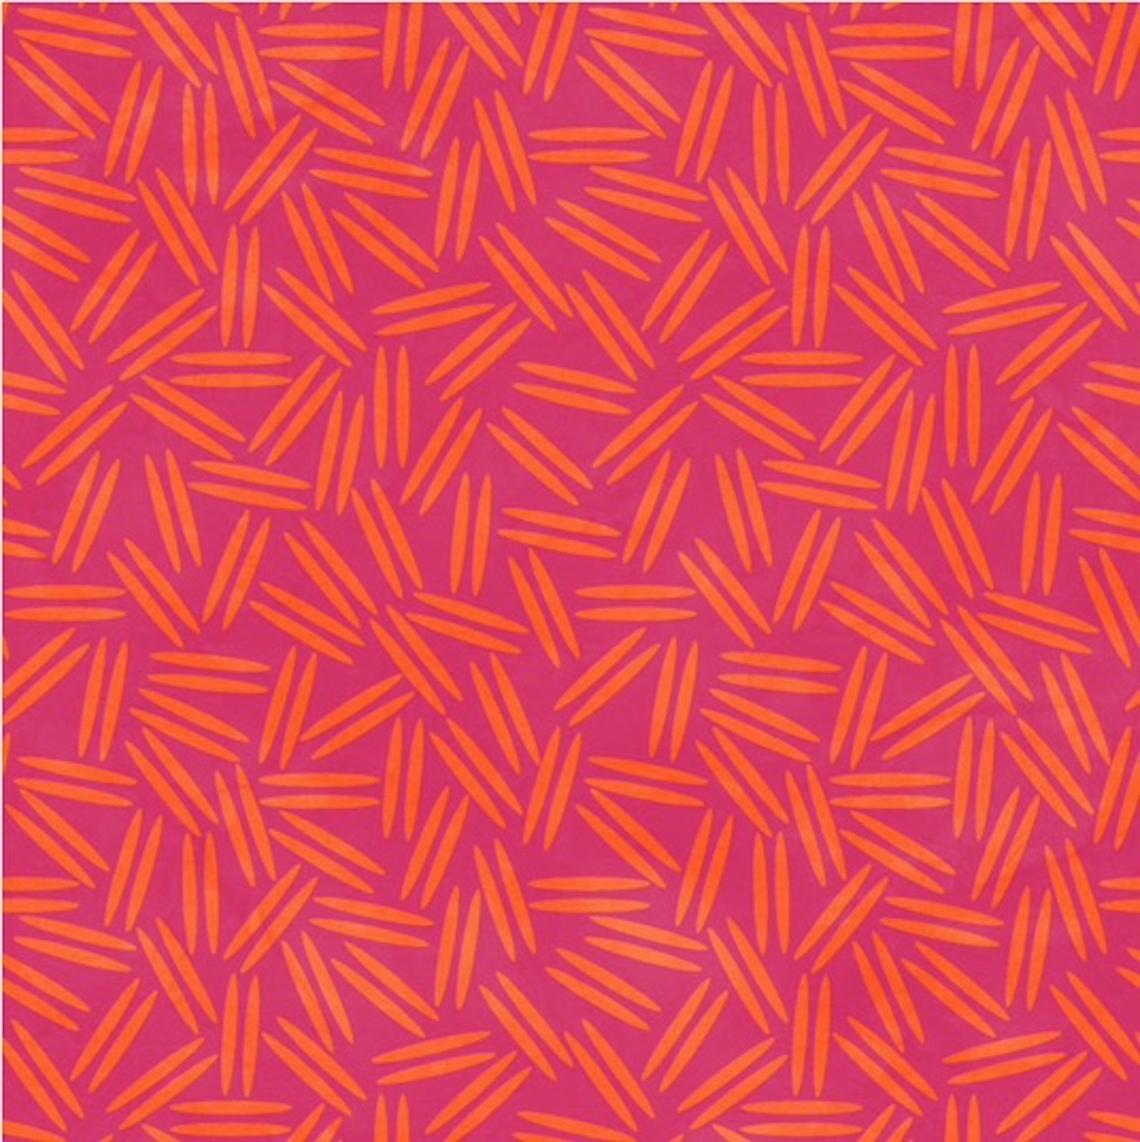 Quilting Fabric with Geometric Lines in Orange on Pink from Twist & Shout by Rivers Bend for Mid West Textiles- Patchwork & Quilting